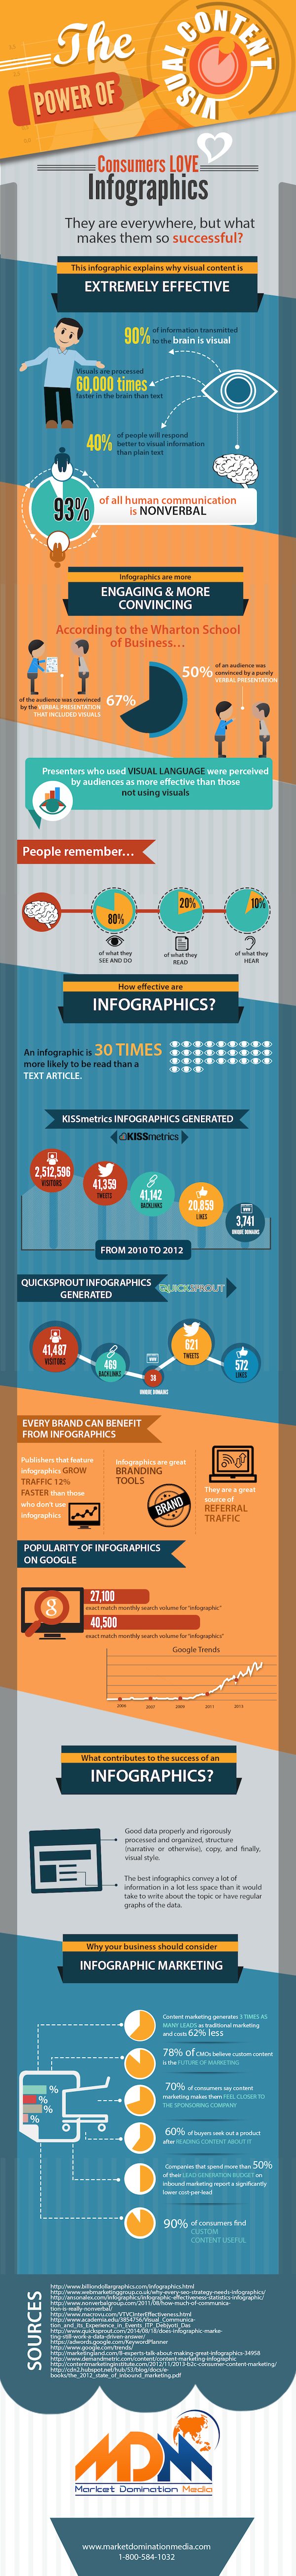 Why Infographics Deliver Results?